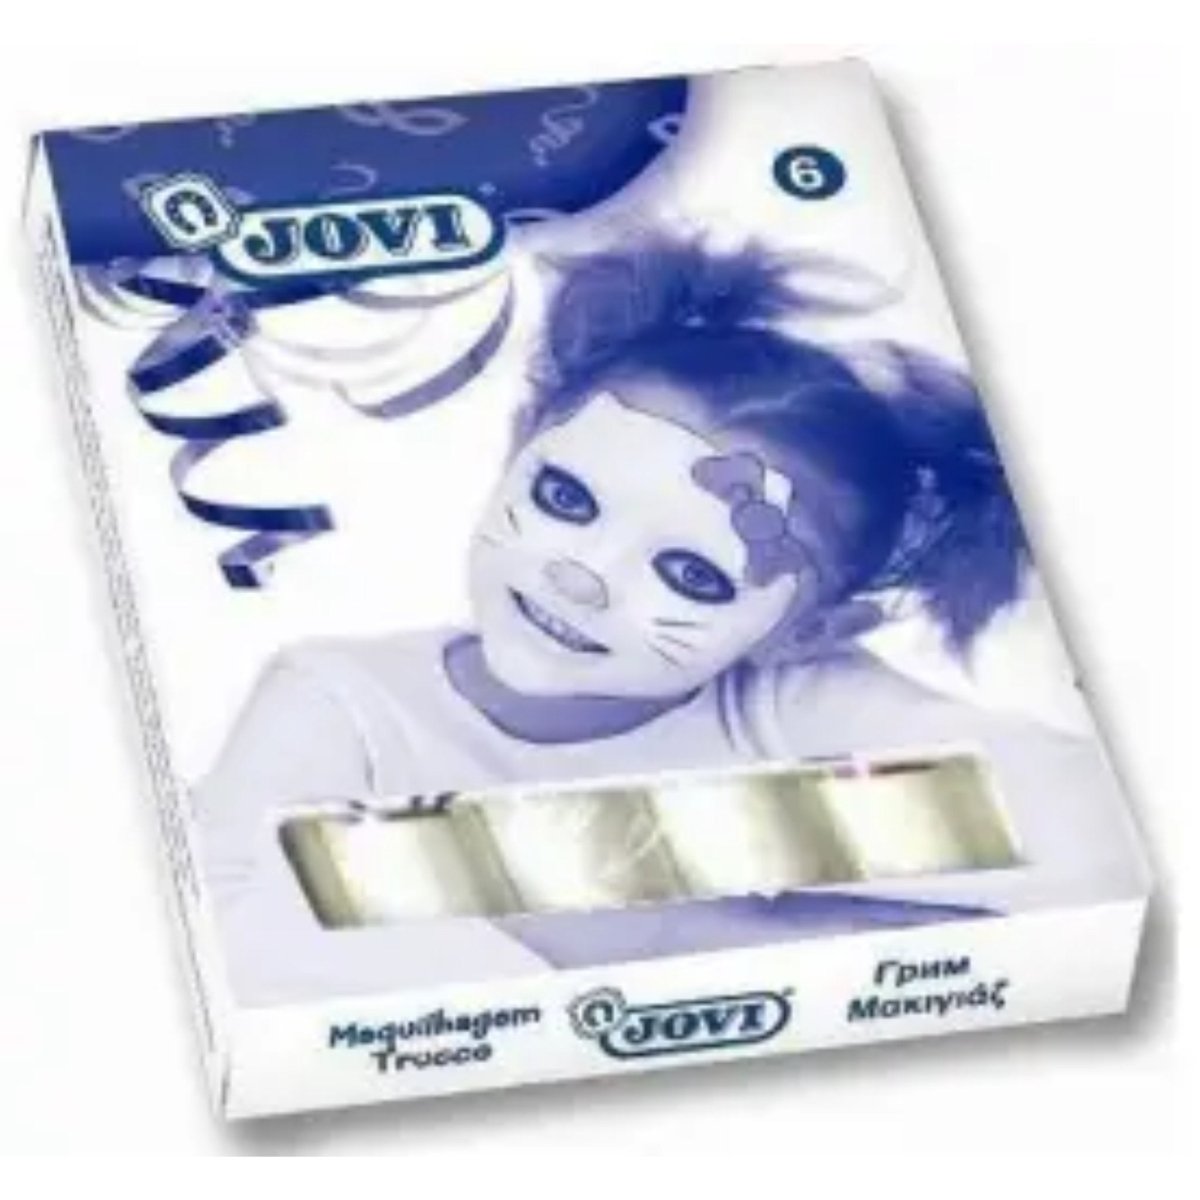 Jovi White Face Paint Crayons - Kids Party Craft